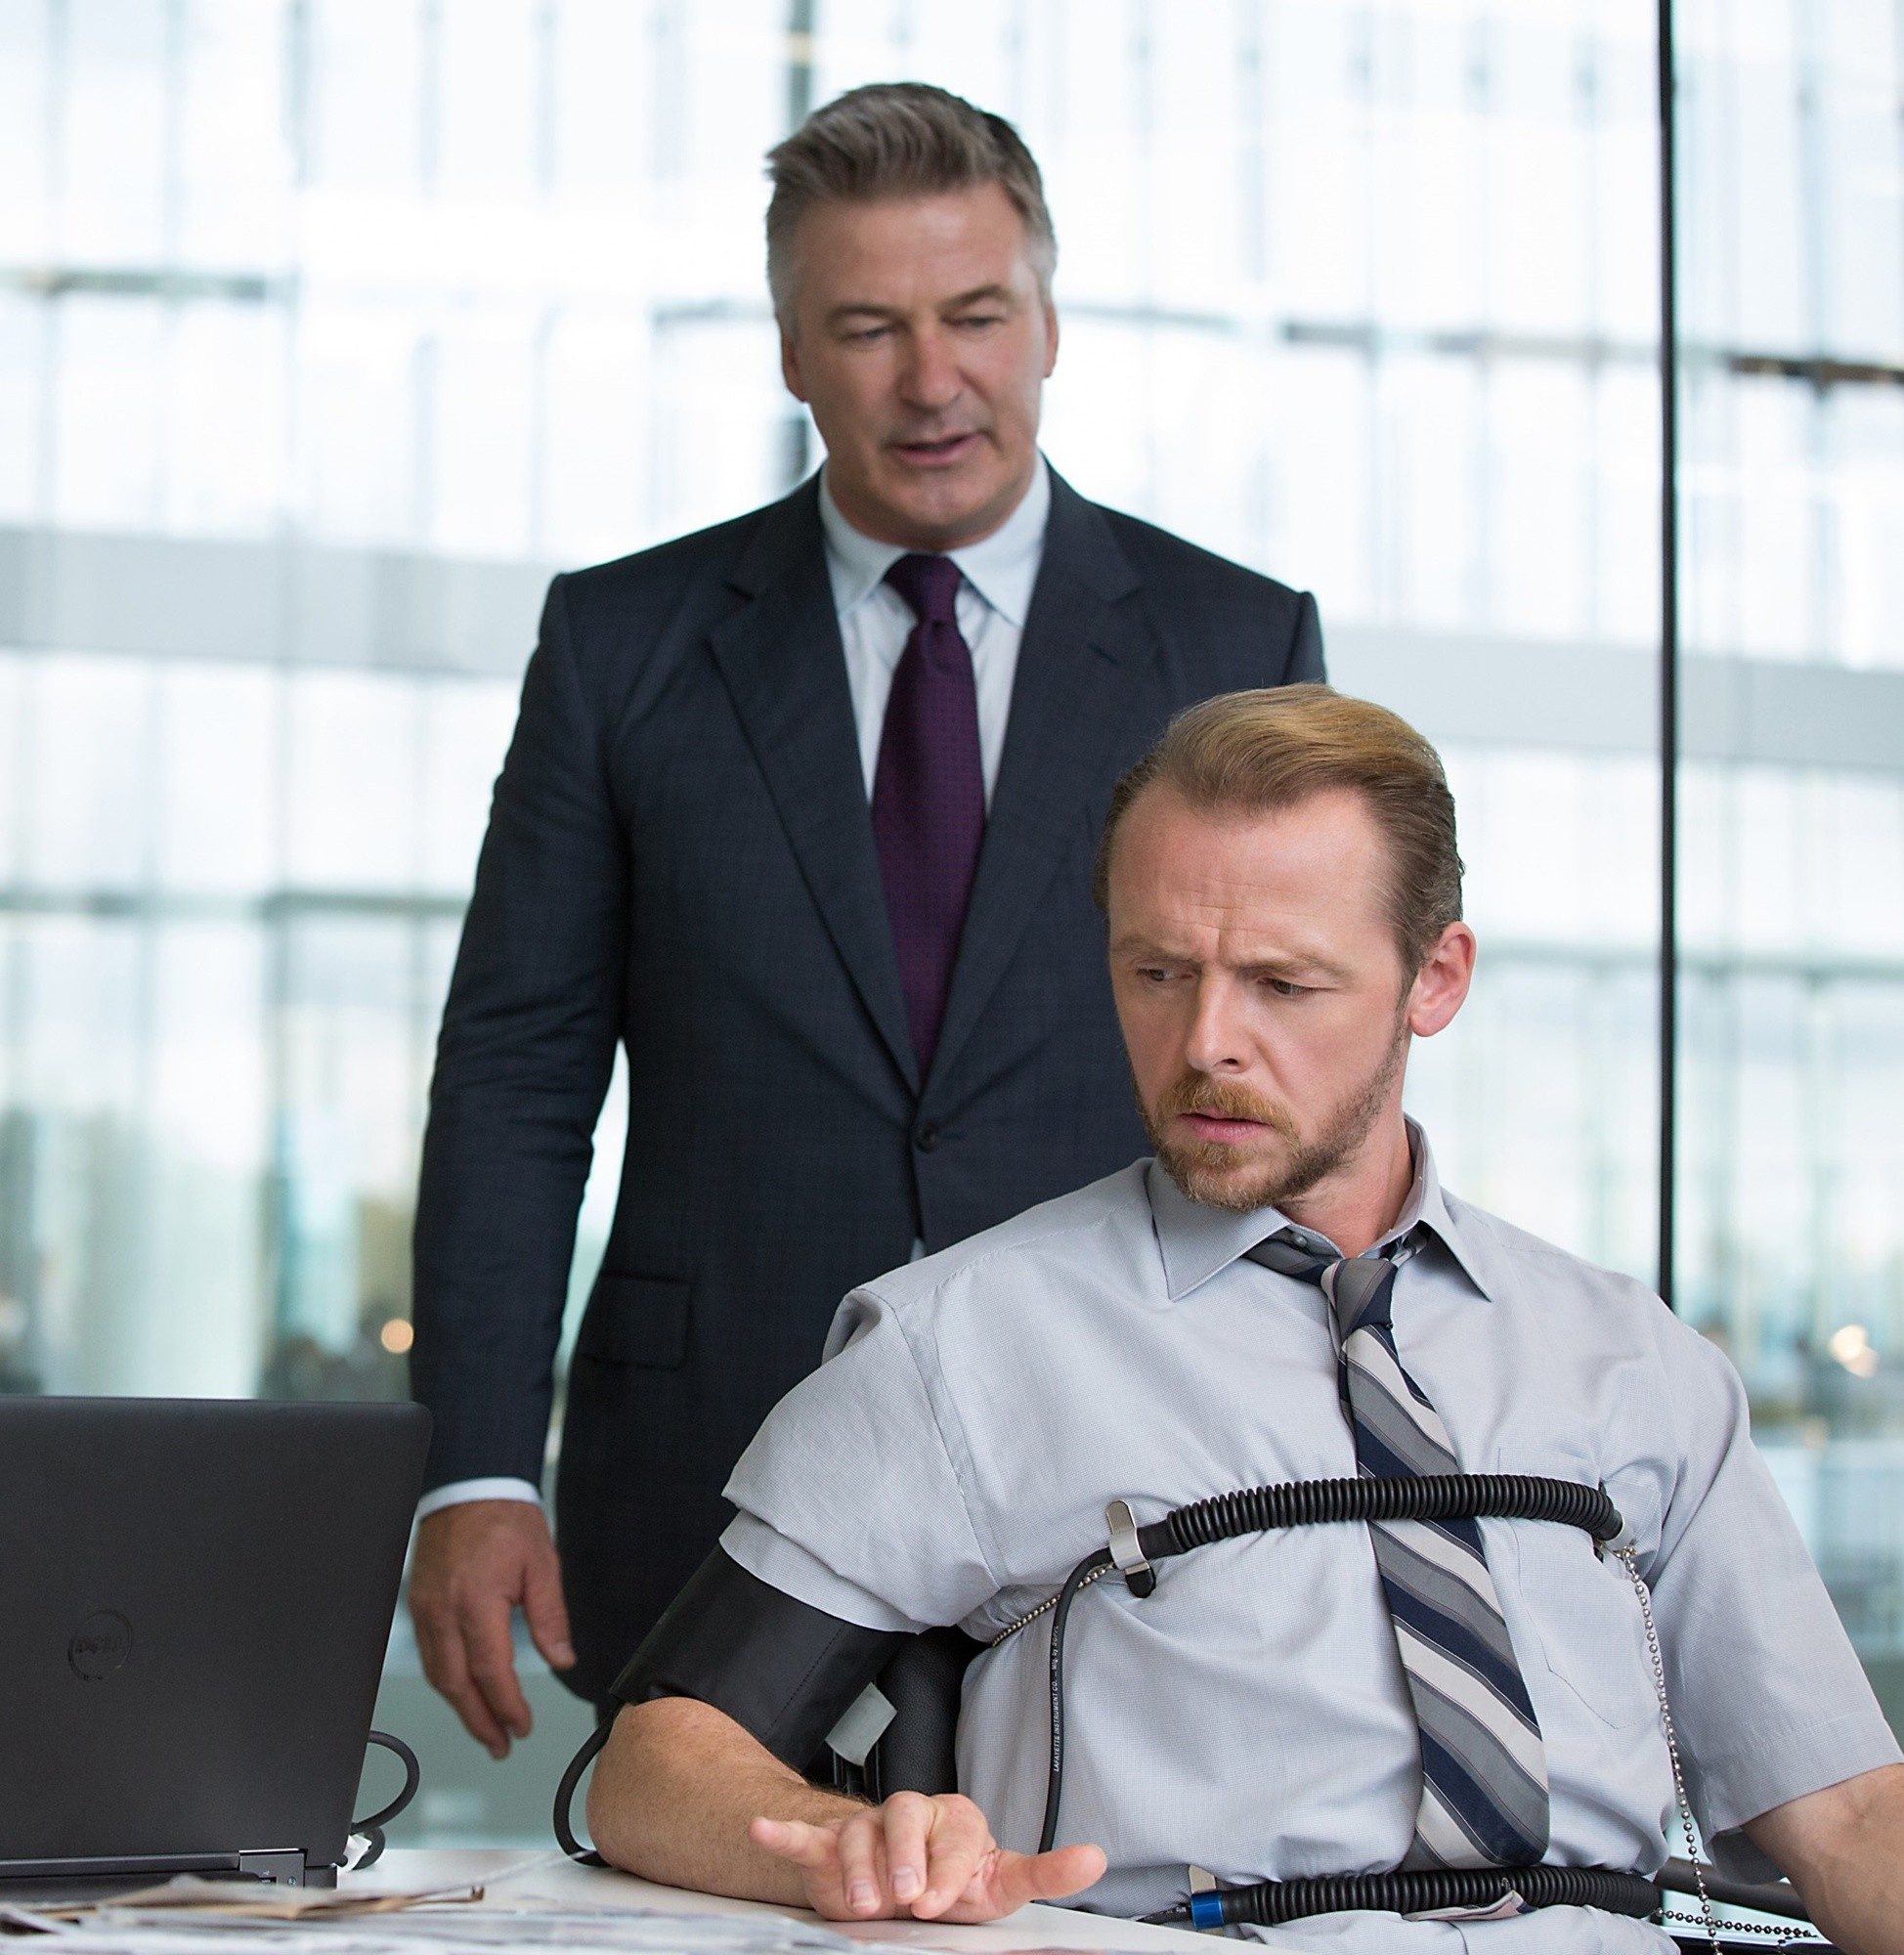 Alec Baldwin and Simon Pegg (stars as Benji Dunn) in Paramount Pictures' Mission: Impossible Rogue Nation (2015)